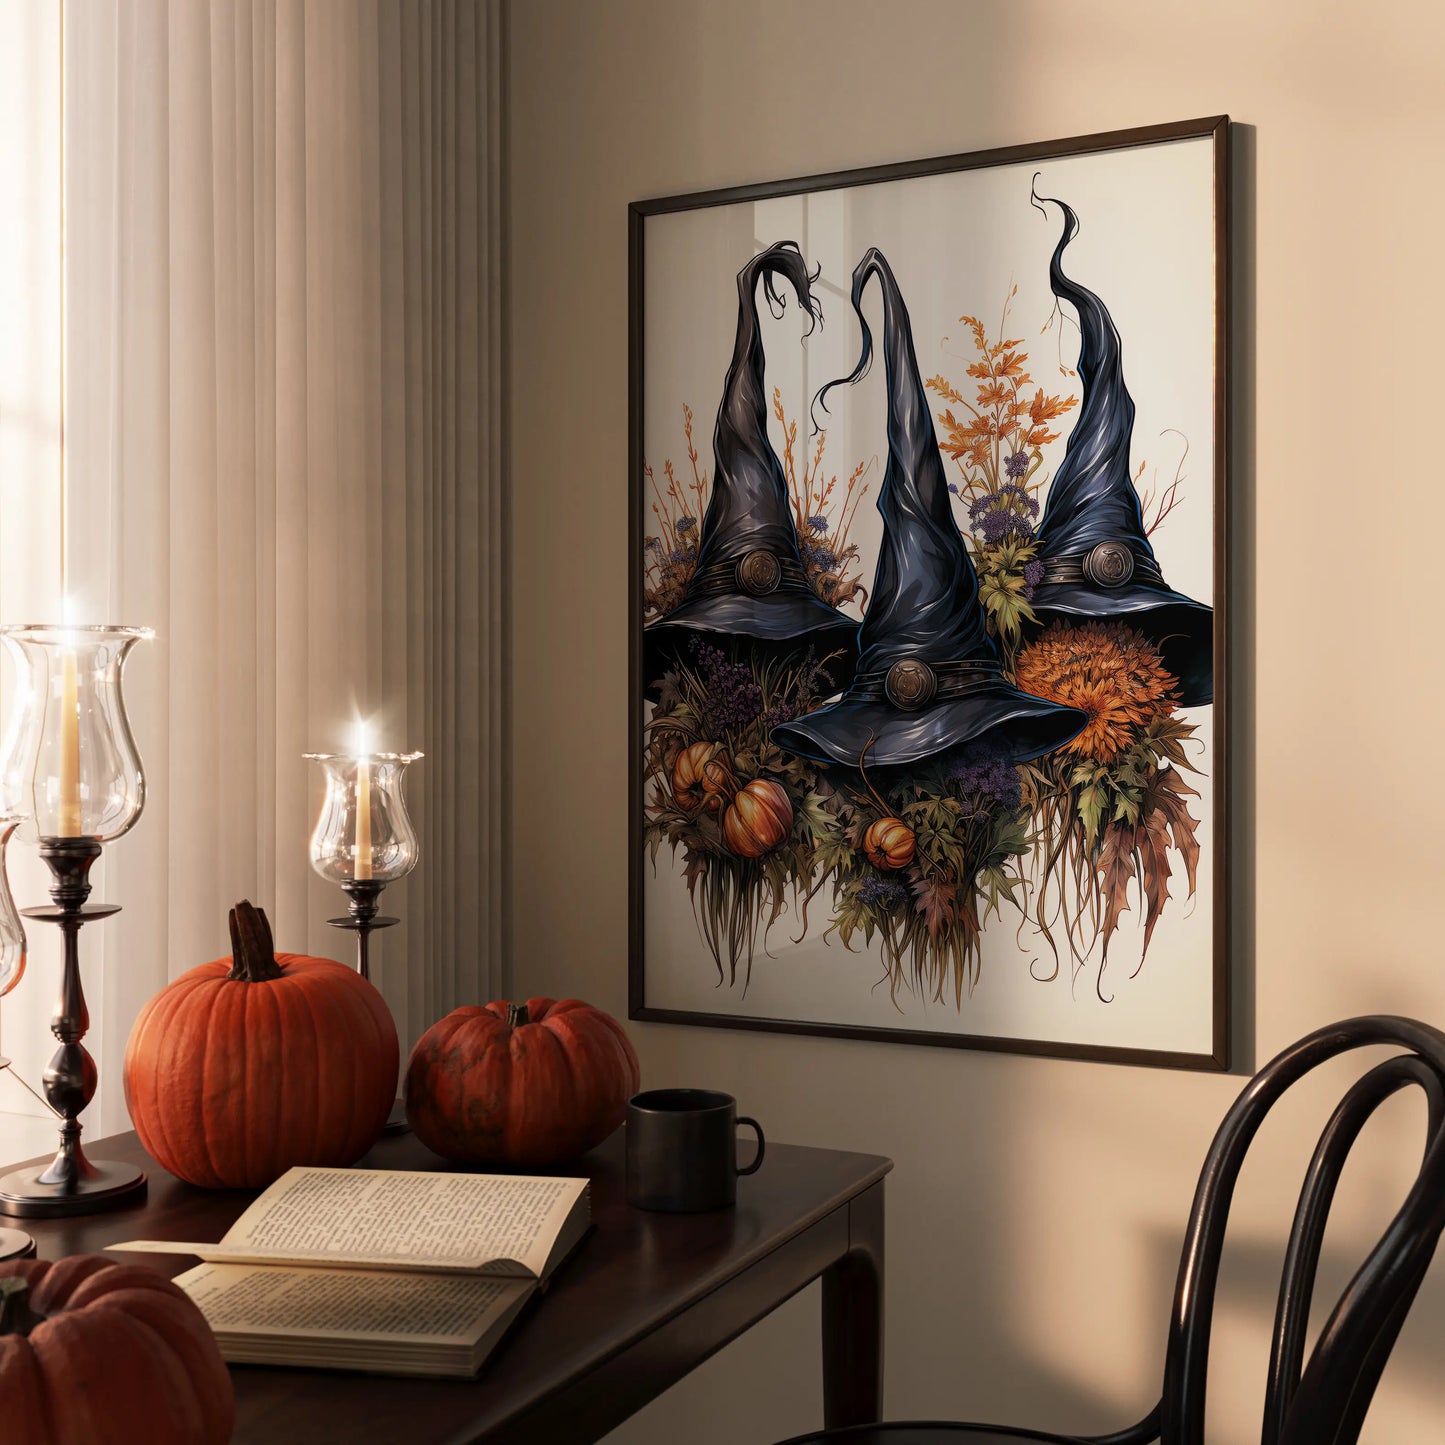 Trick or Treat No 7 - Halloween - Watercolor - Poster